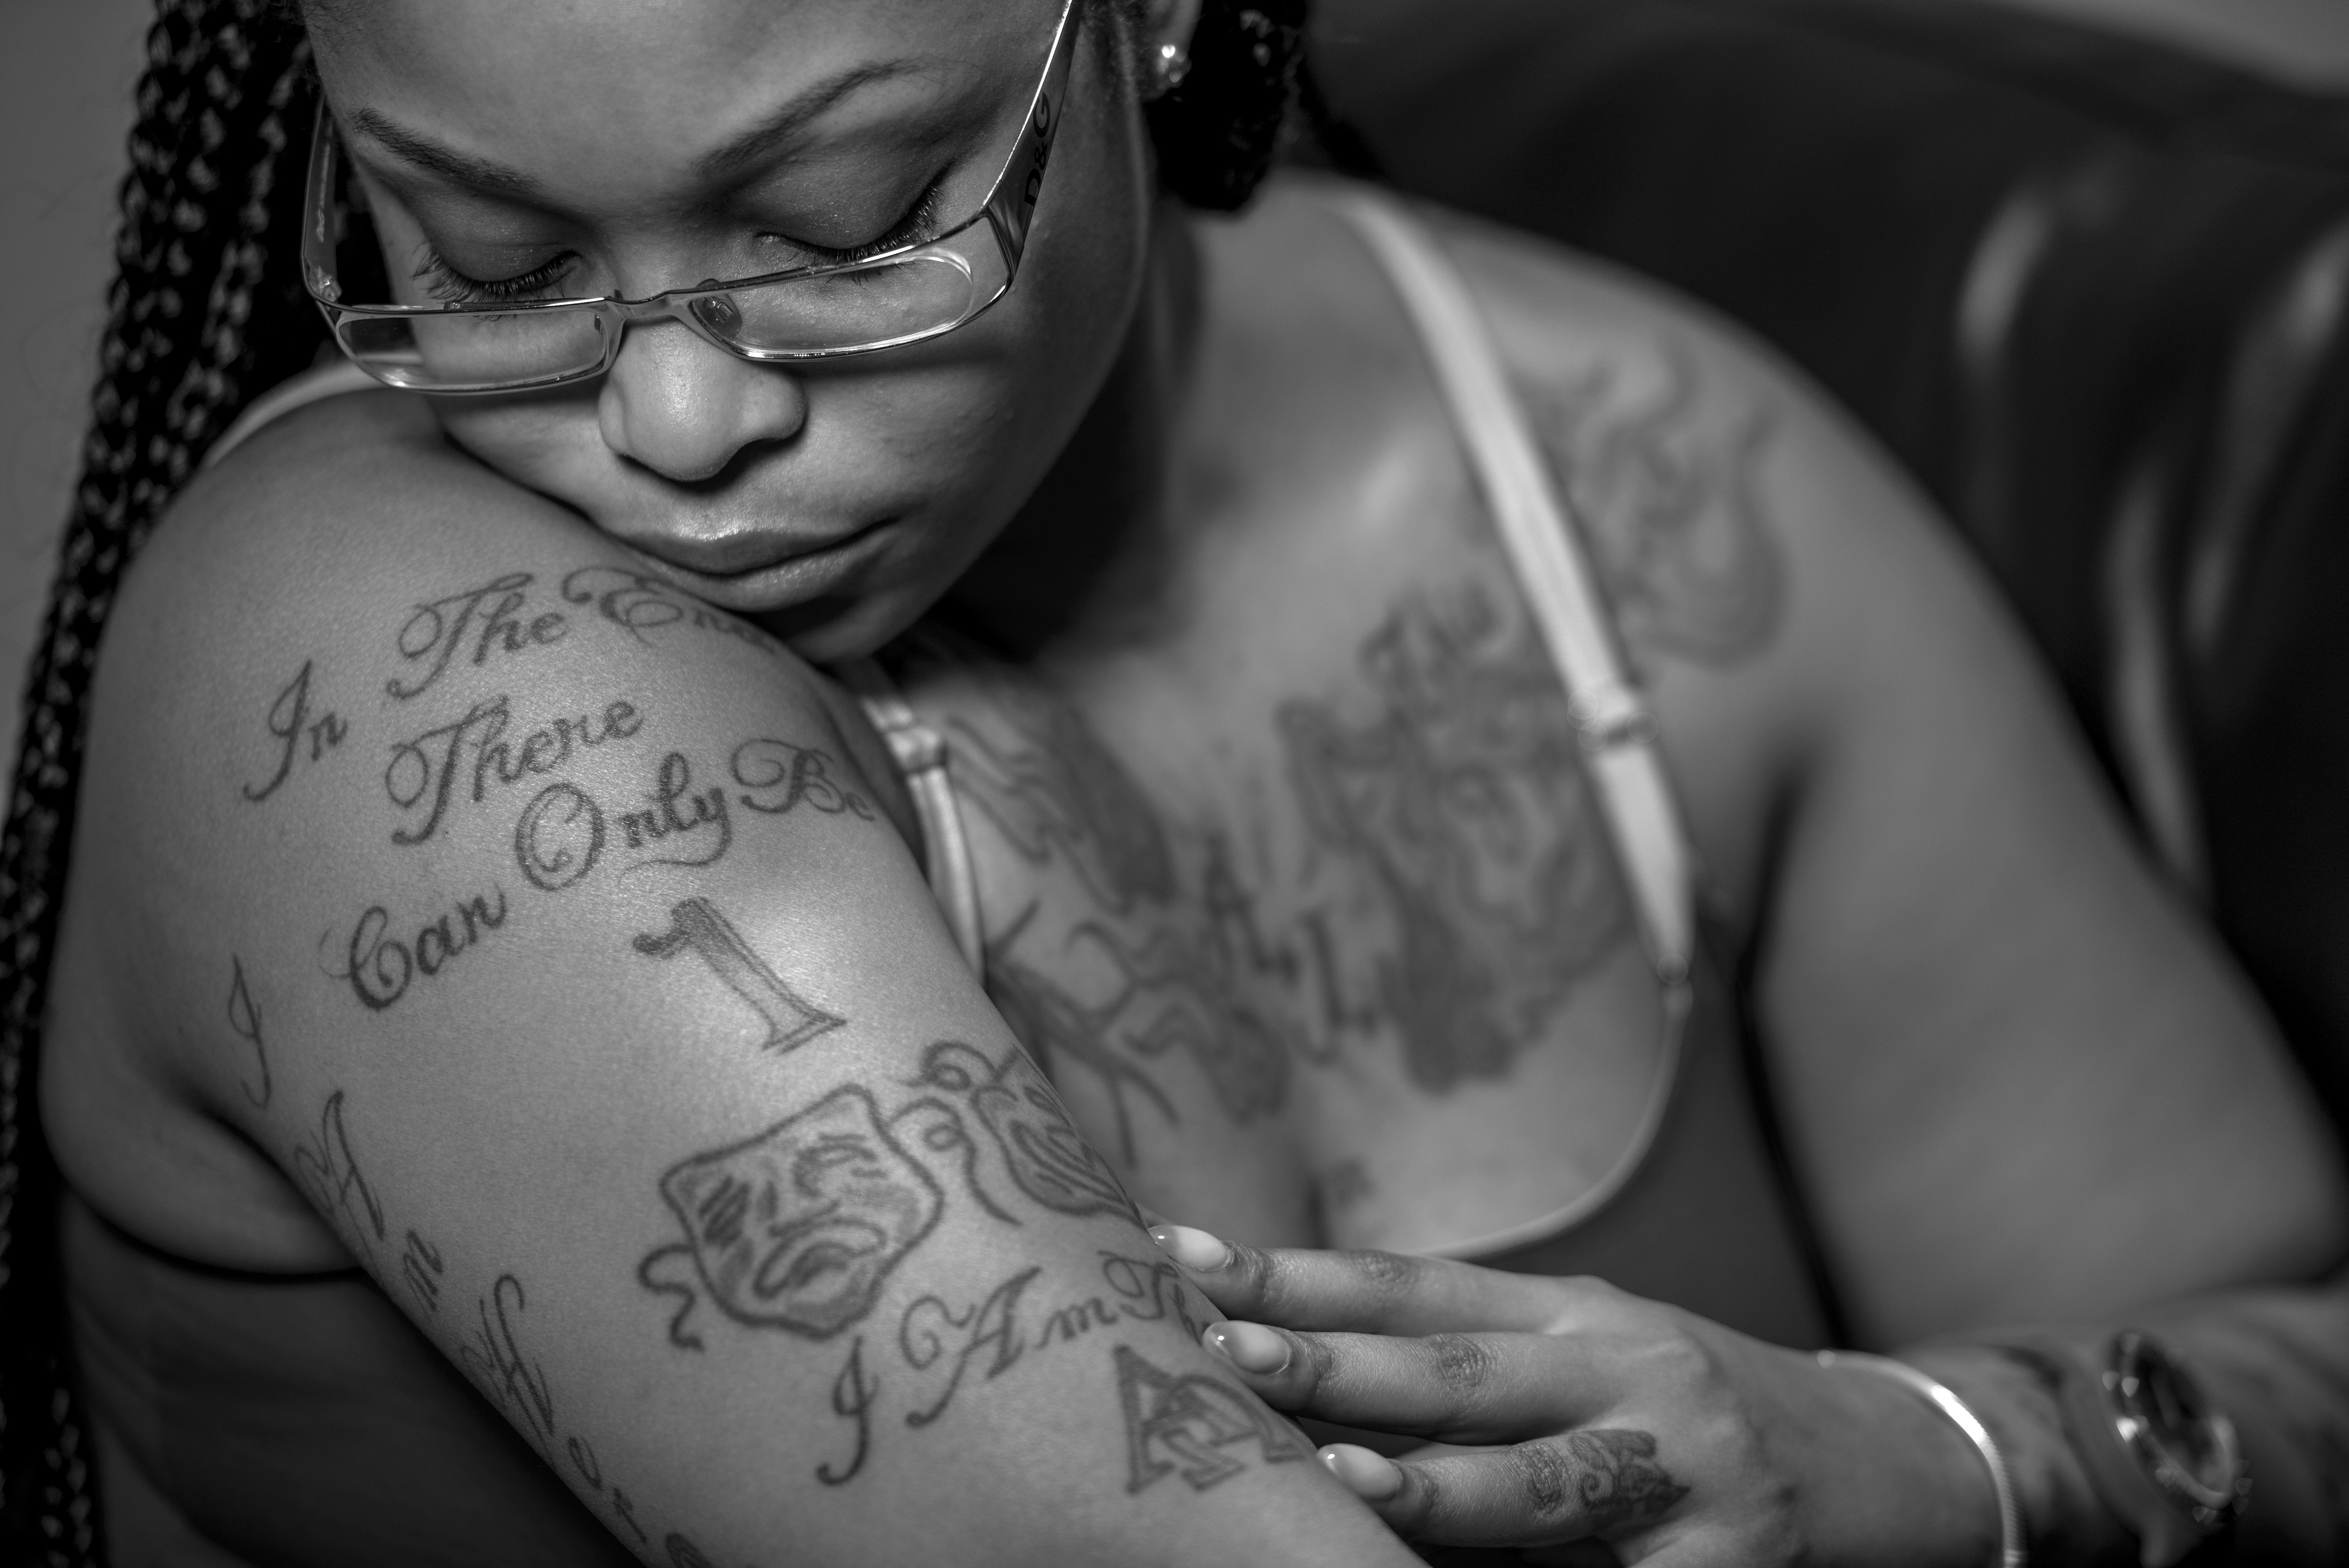 With tattoos, breast cancer fighters choose to tell their stories